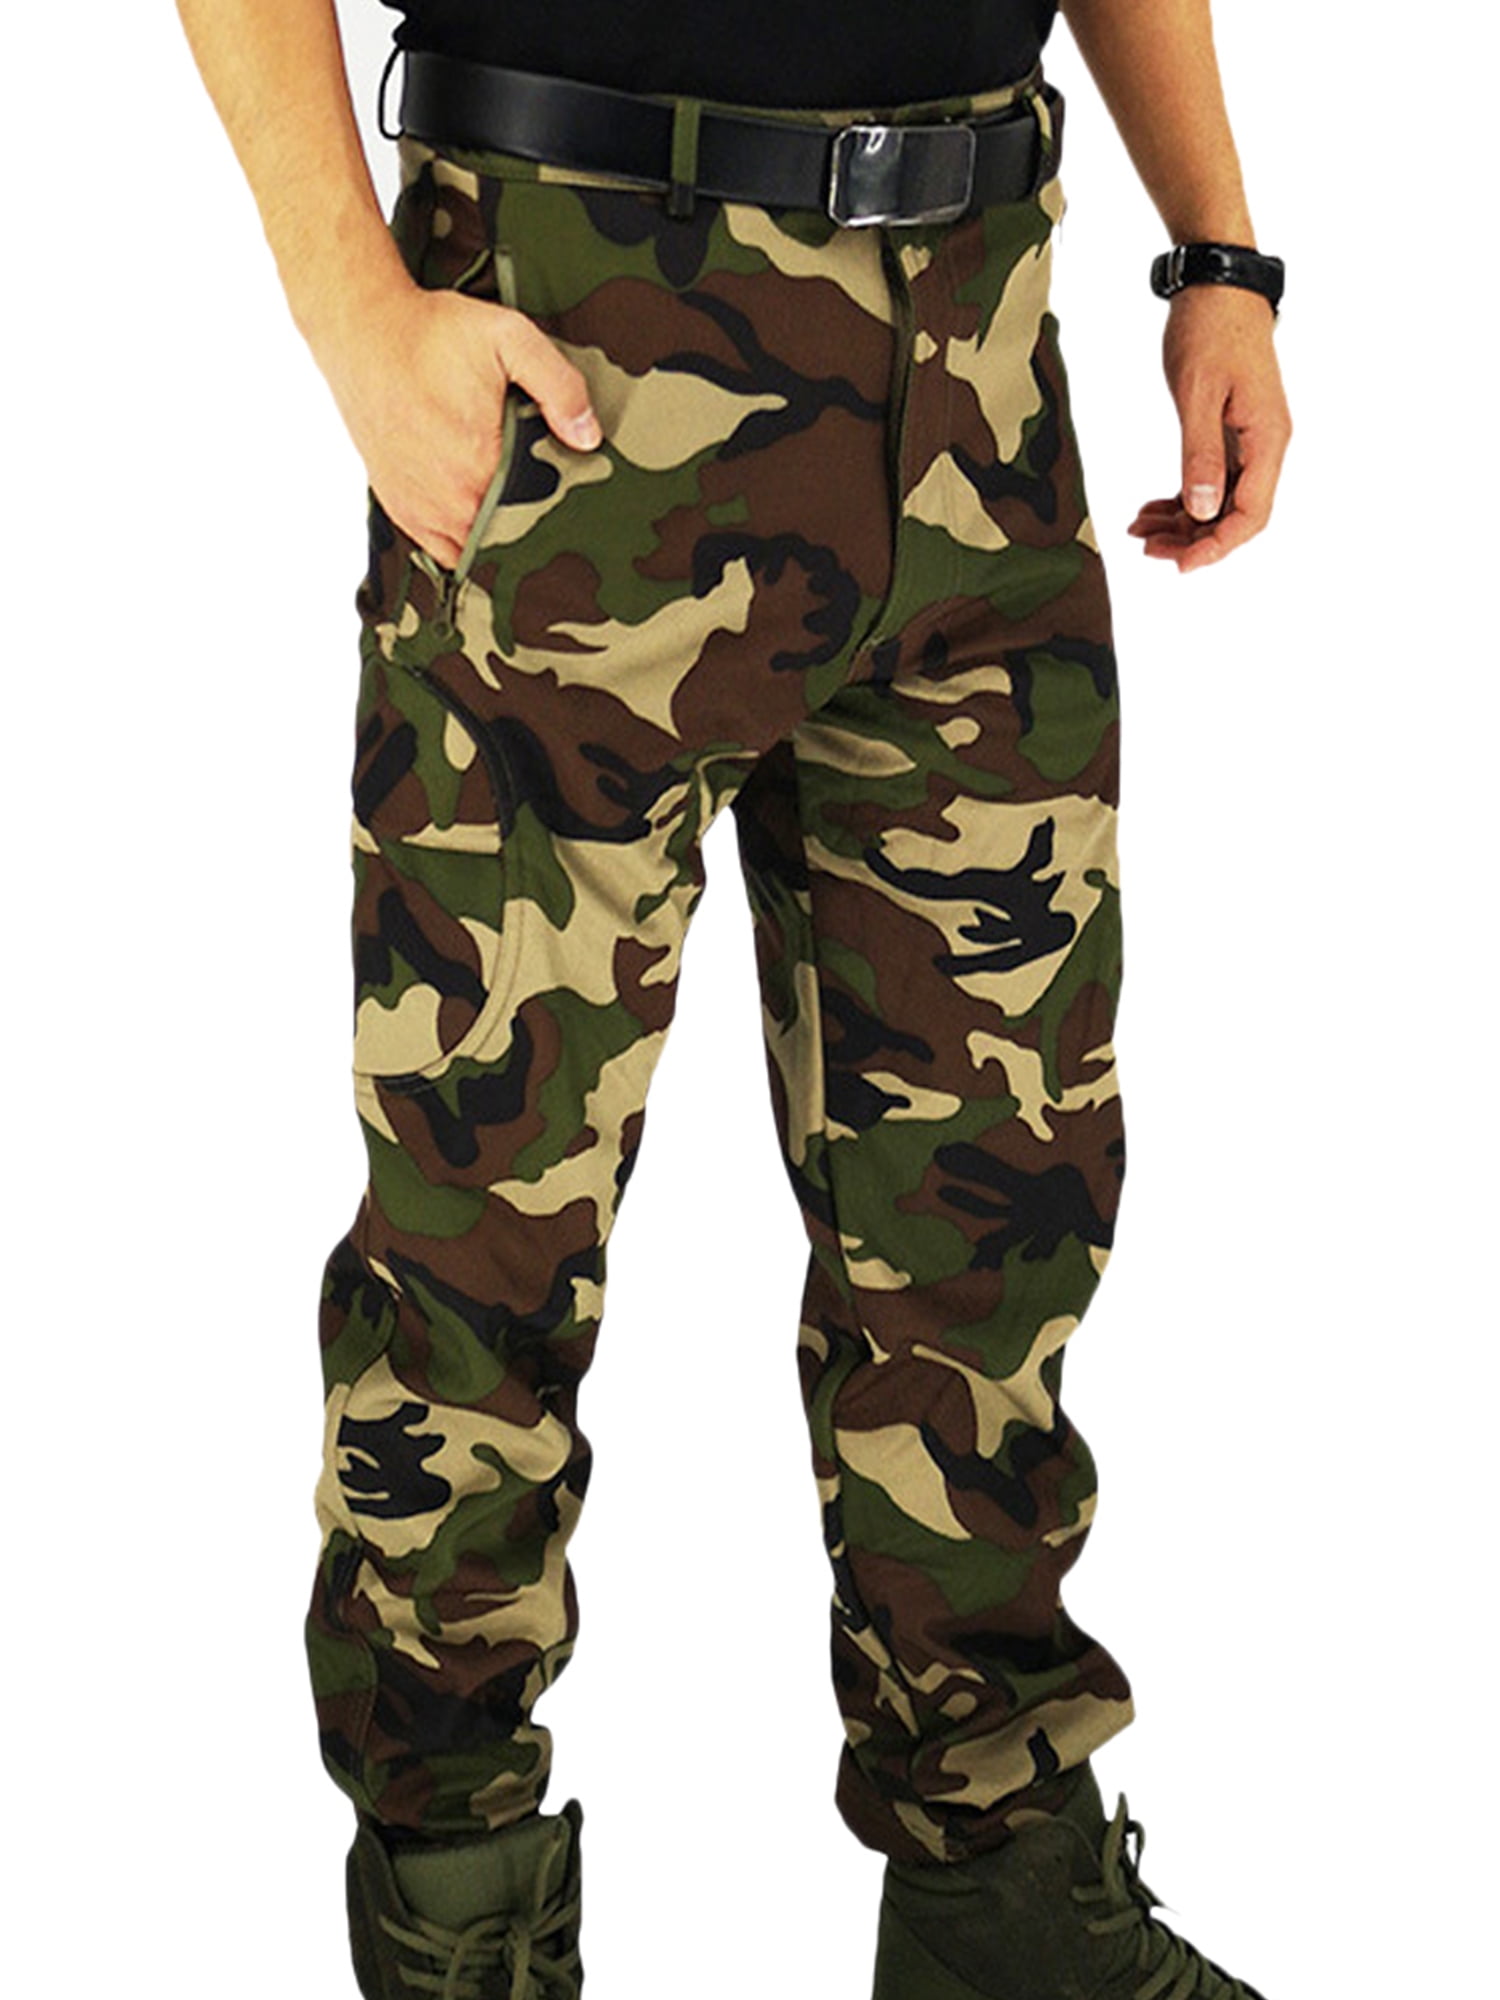 Combat Cargo casual camping trousers Men's Camouflage Army Military Trousers 